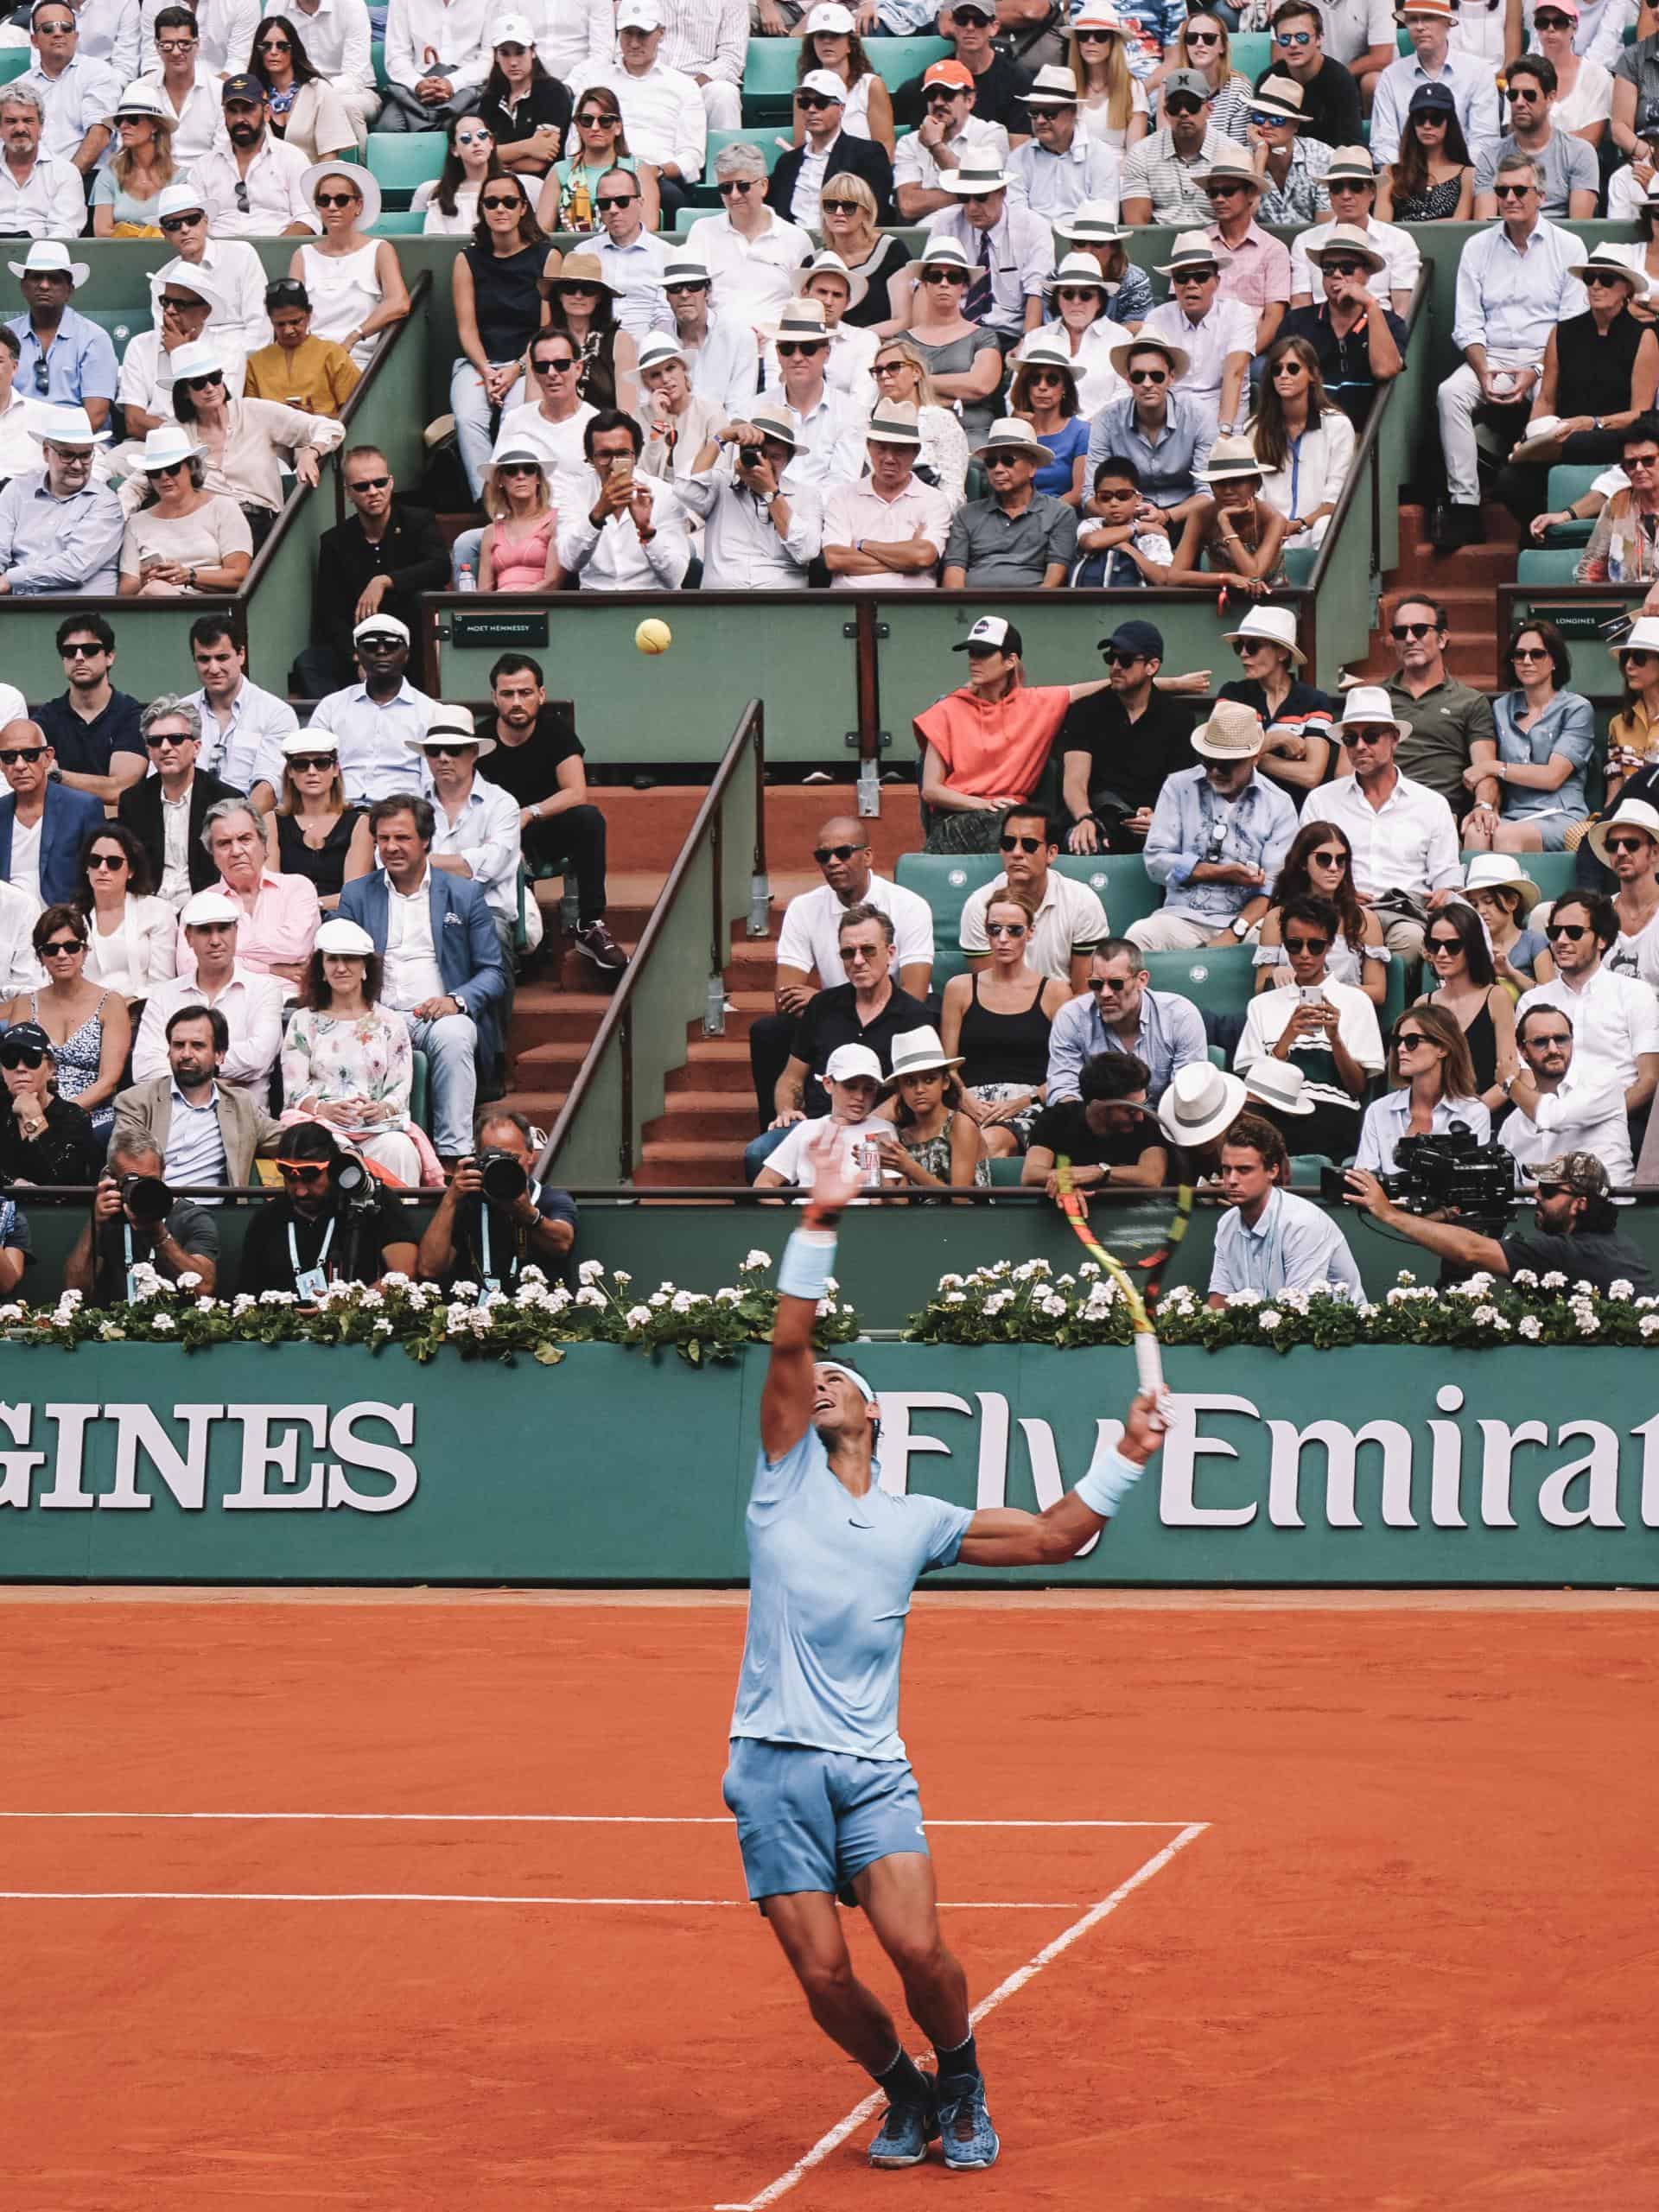 Nadal serves the ball during the french open 2018